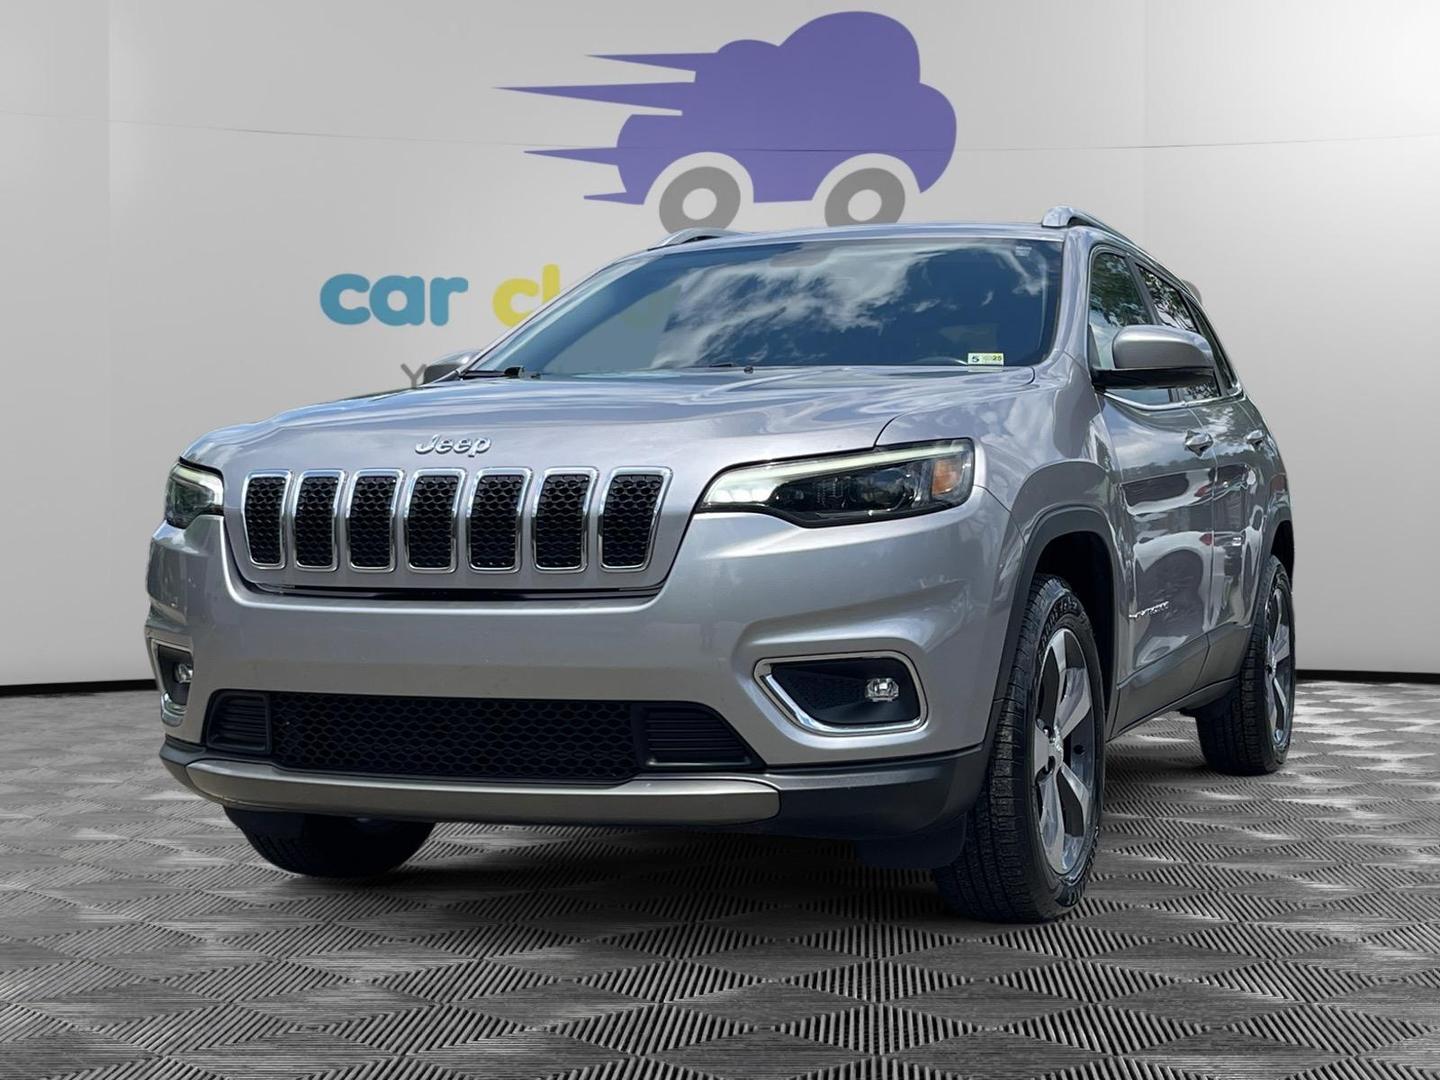 2019 Jeep Cherokee Utility 4d Limited 4wd 3.2l V6 - Image 1